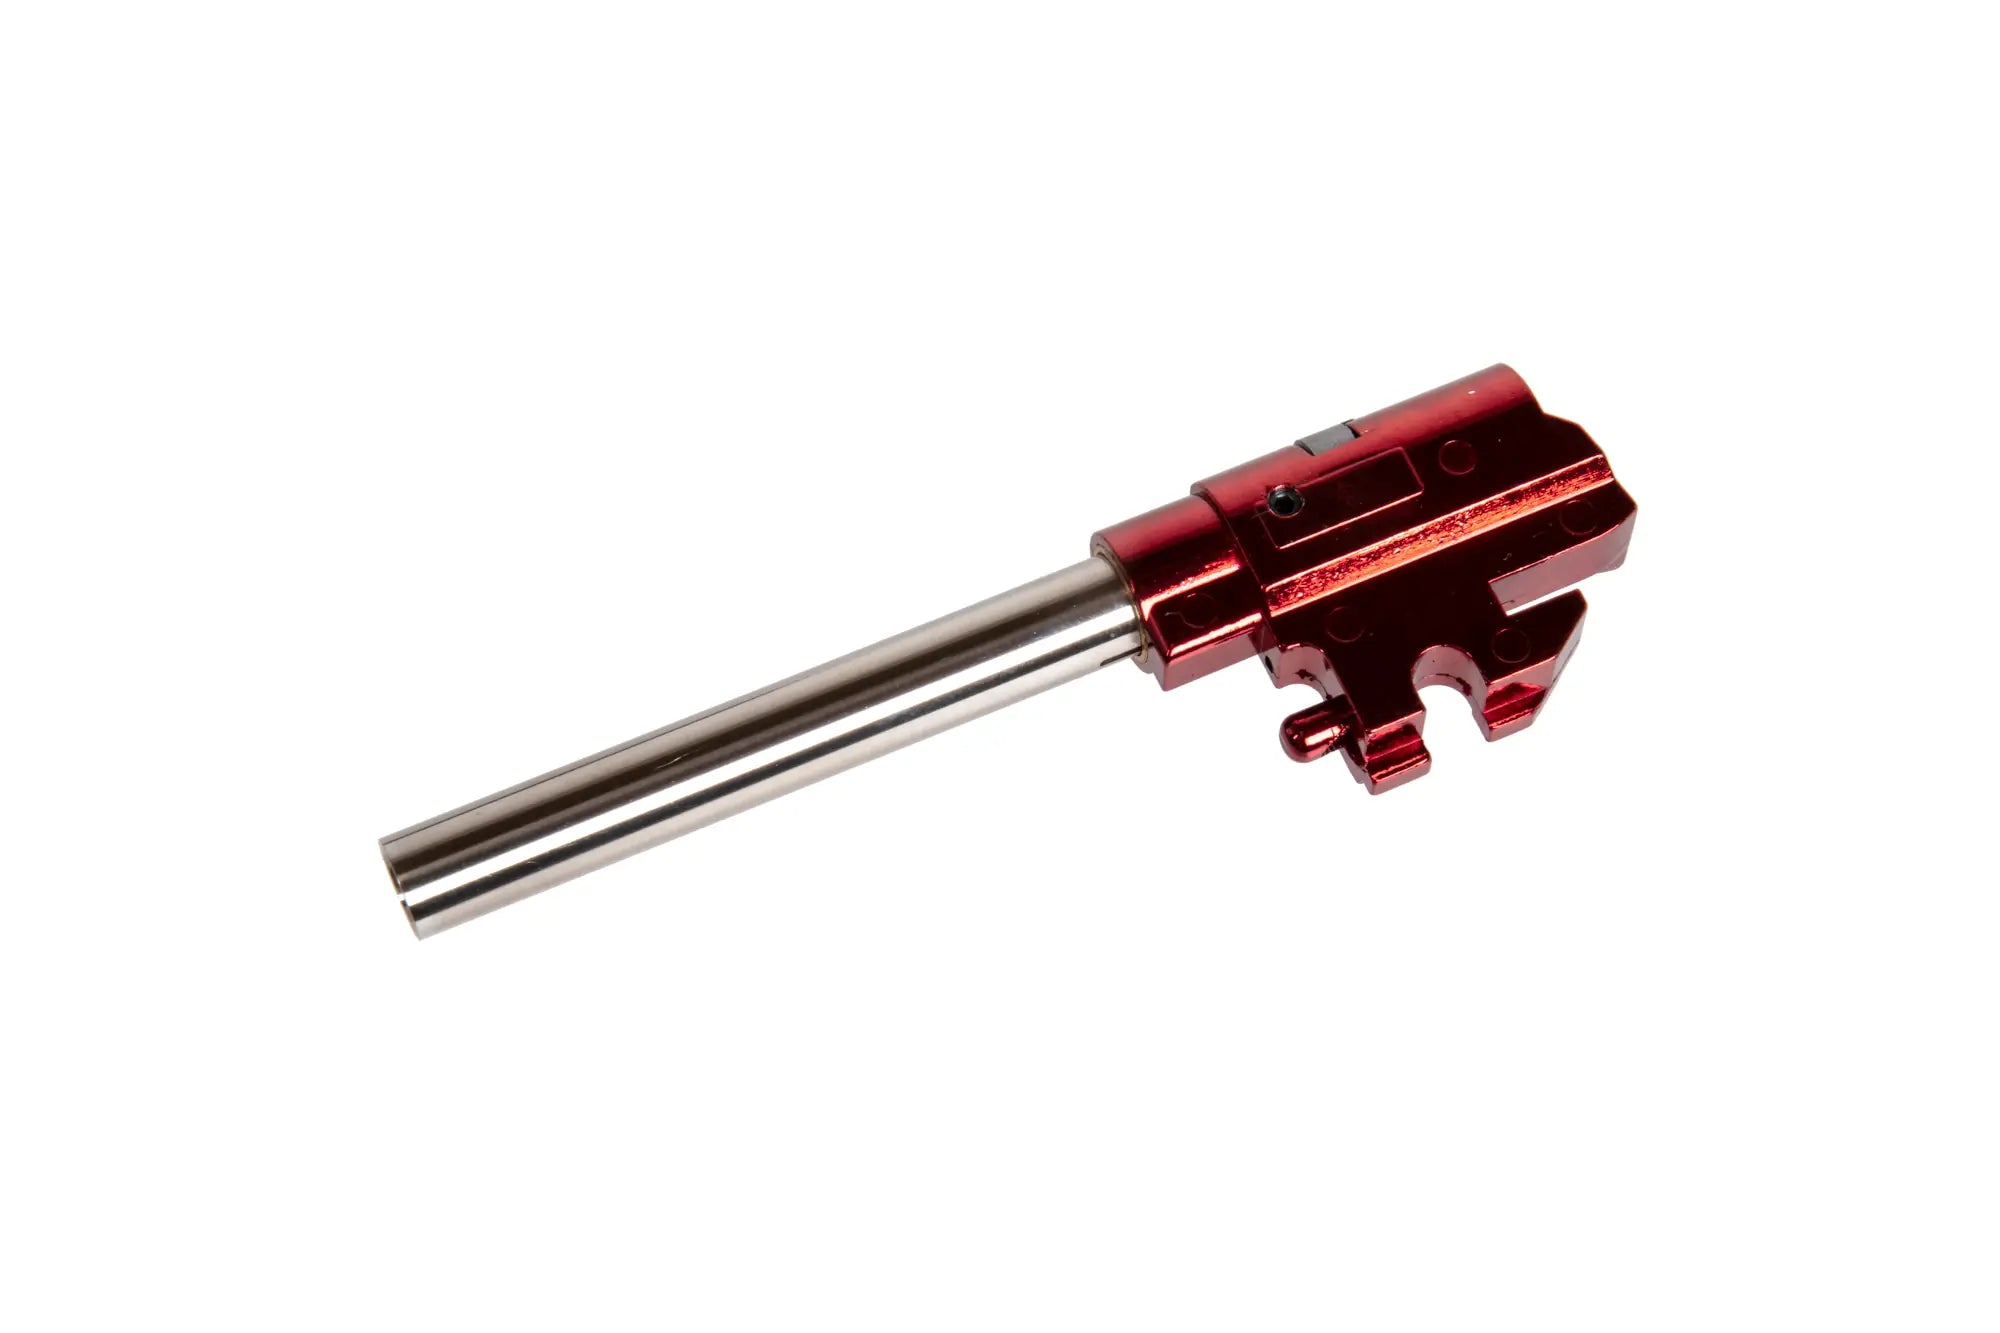 Hop Up chamber and precision barrel kit S+ 86mm T.N.T. THE ONE for 1911/Hi-Capa replicas-1